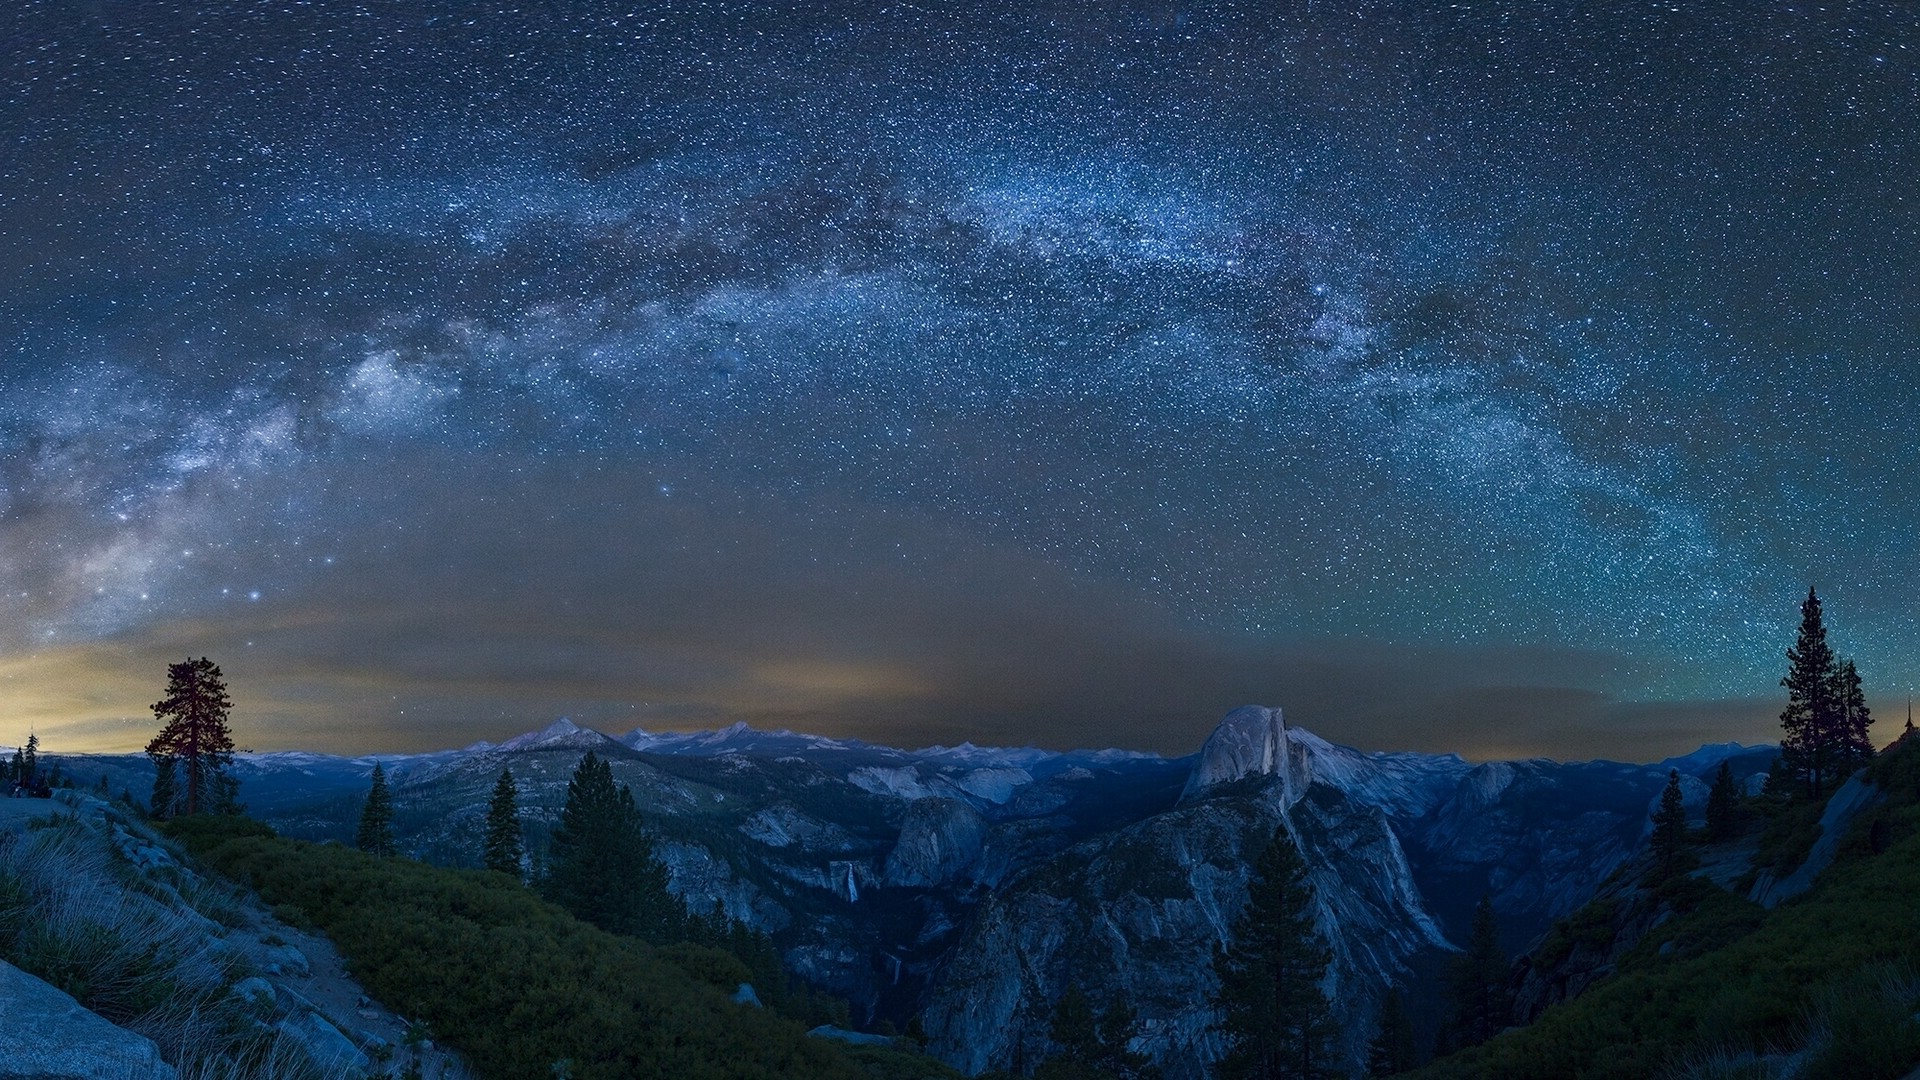 night, Trees, Nature, Landscape, Yosemite National Park, Milky Way, USA, Half Dome, Mountain, Stars, Rock, Forest, Waterfall Wallpaper